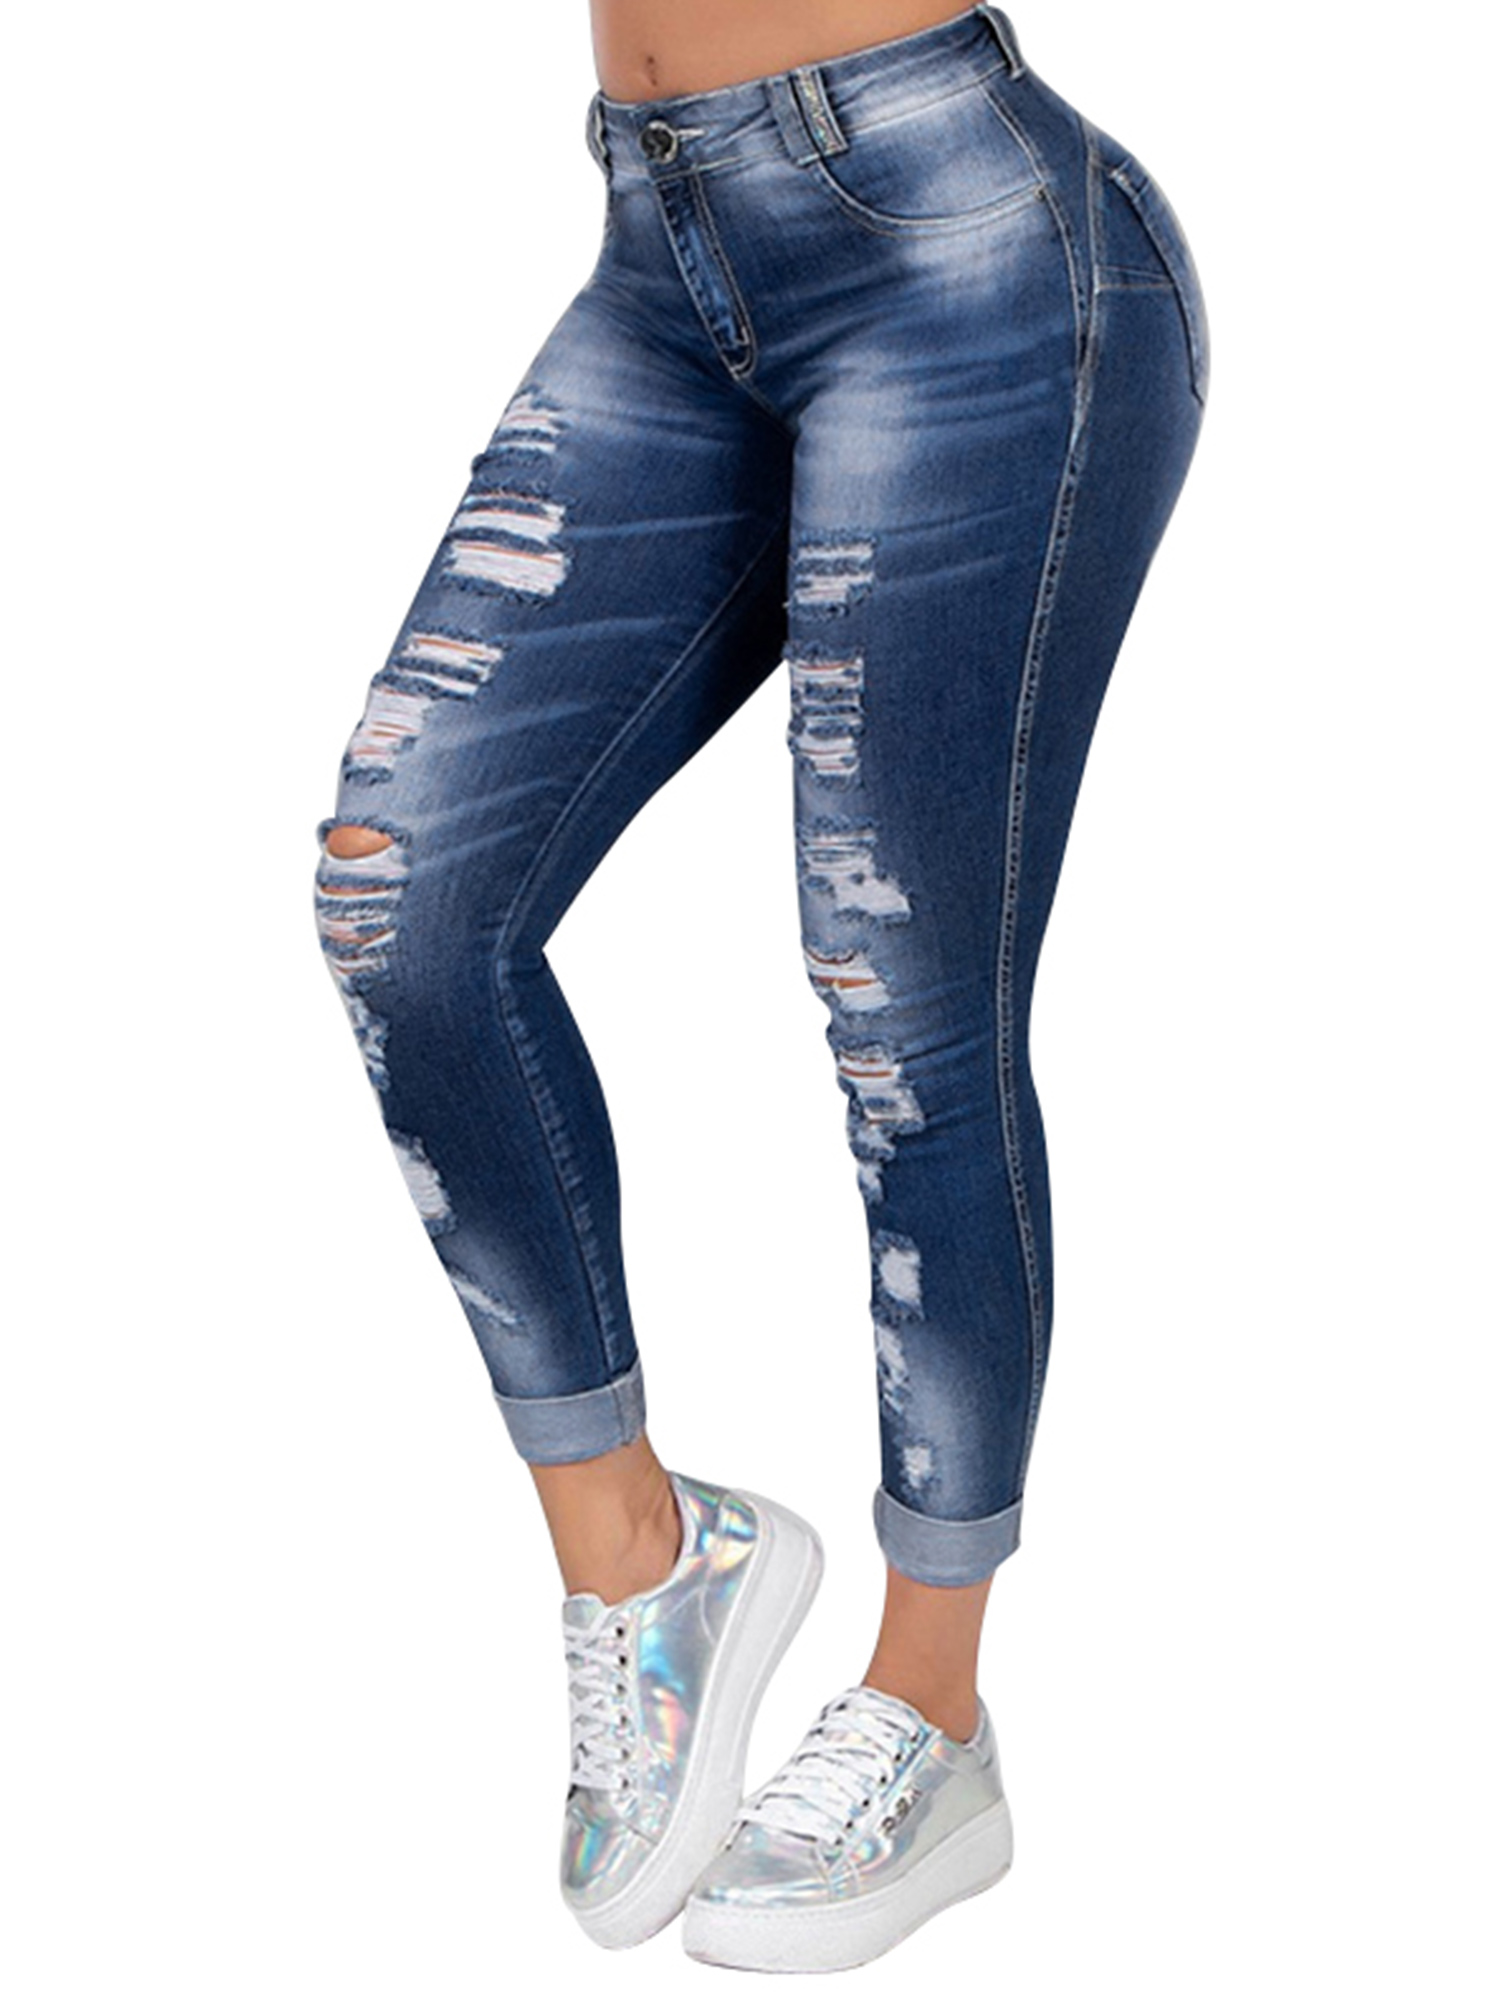 Ripped Distressed Jeans For Women Mid Rise Skinny Slim Fit Jeans Ladies Cut Denim Trouser Pants For Juniors - image 1 of 2